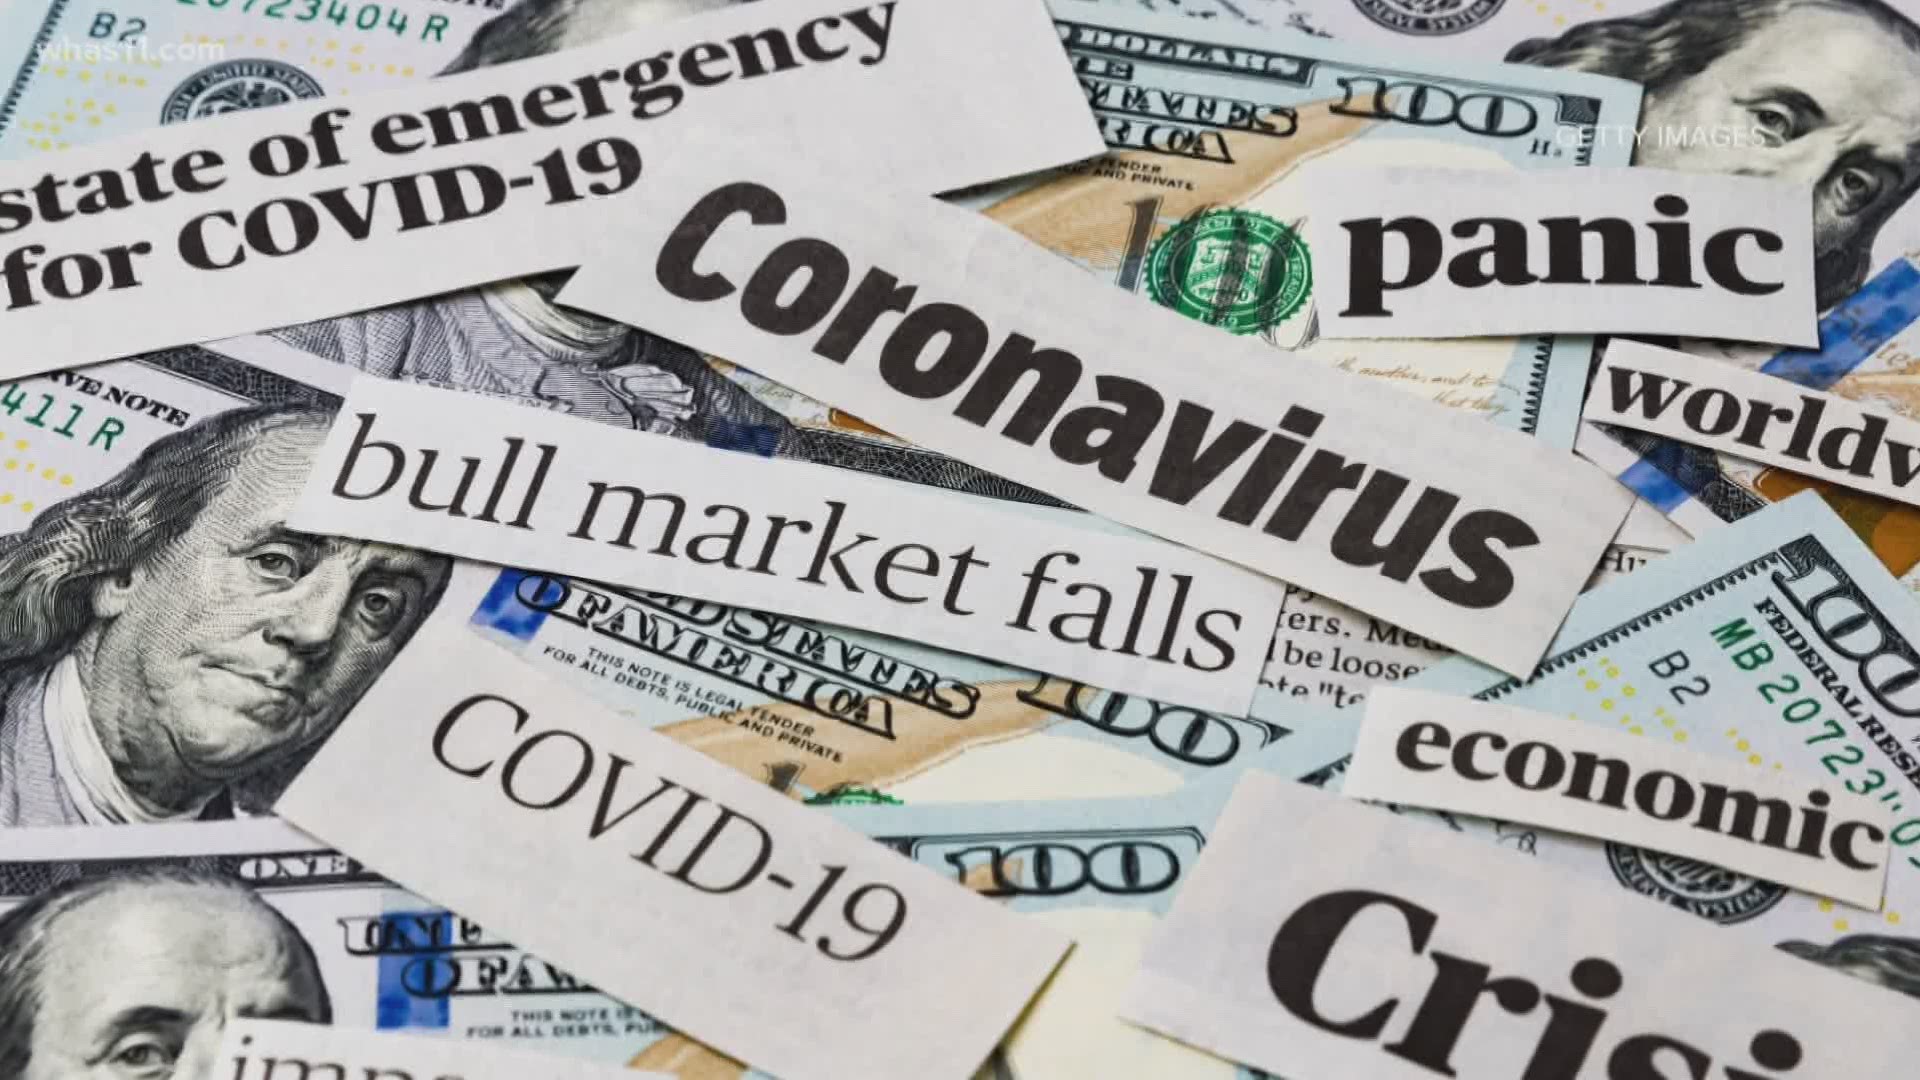 As people are waiting for unemployment claims to come through, some are facing evictions amid the coronavirus pandemic.